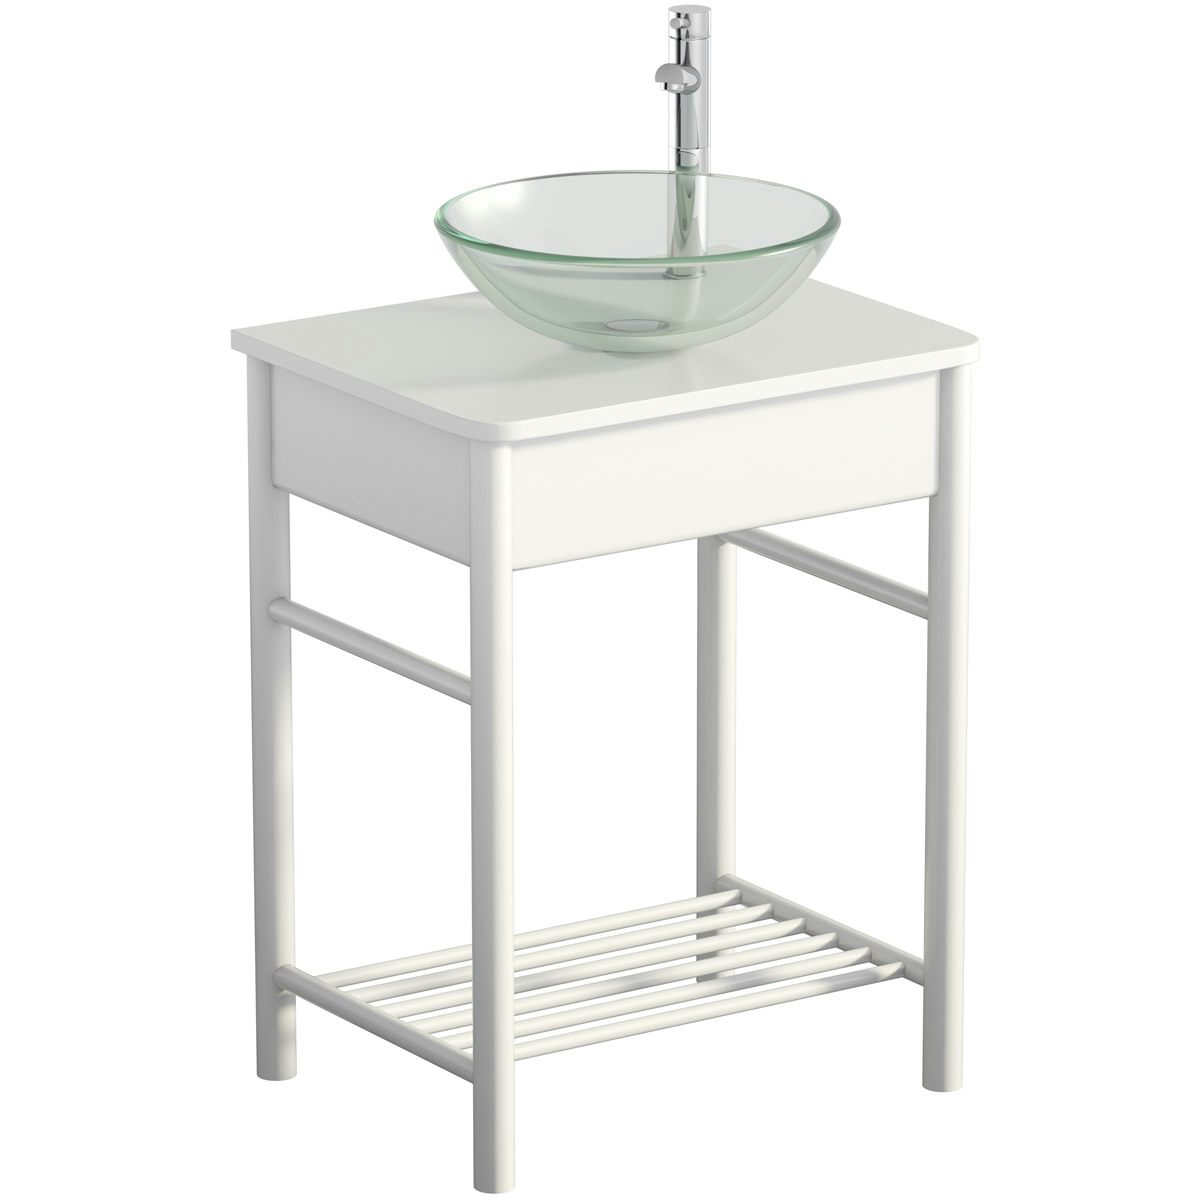 Mode South Bank white washstand and top 600mm with Mackintosh glass countertop basin, tap and waste